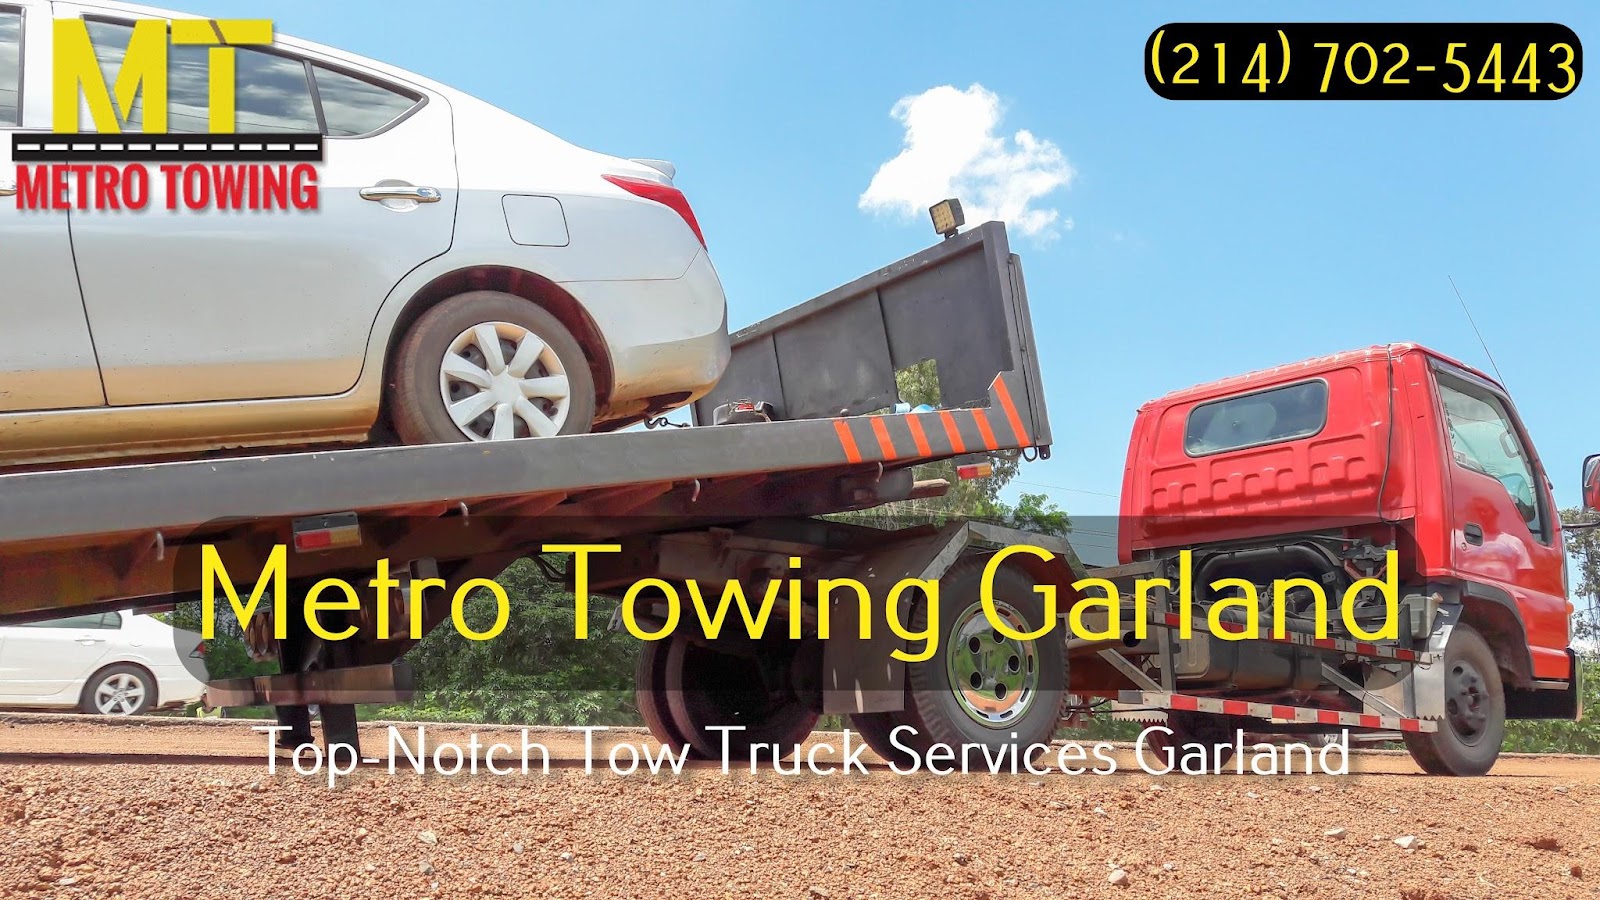 Metro Towing Garland is a locally owned and operated towing company in Garland, TX.